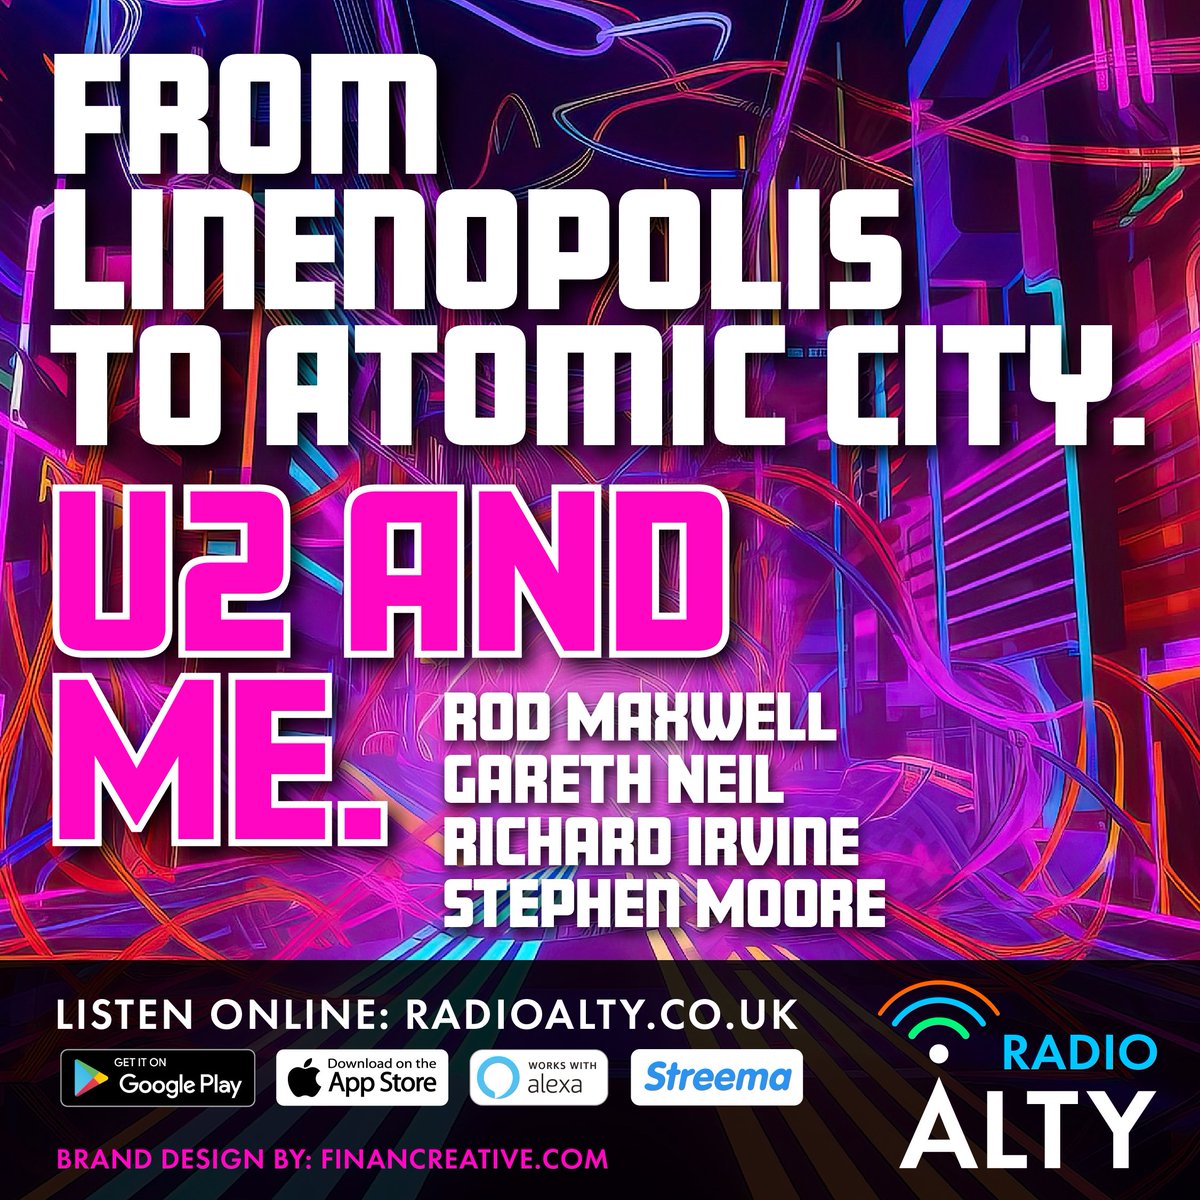 Today from 2pm - Live on RadioAlty.co.uk - online - apps - #Alexa. Supported by The Owners' Club. With thanks to FinanCreative.com for brand design. #U2 #Belfast #KingsHall #Sphere #JoshuaTree